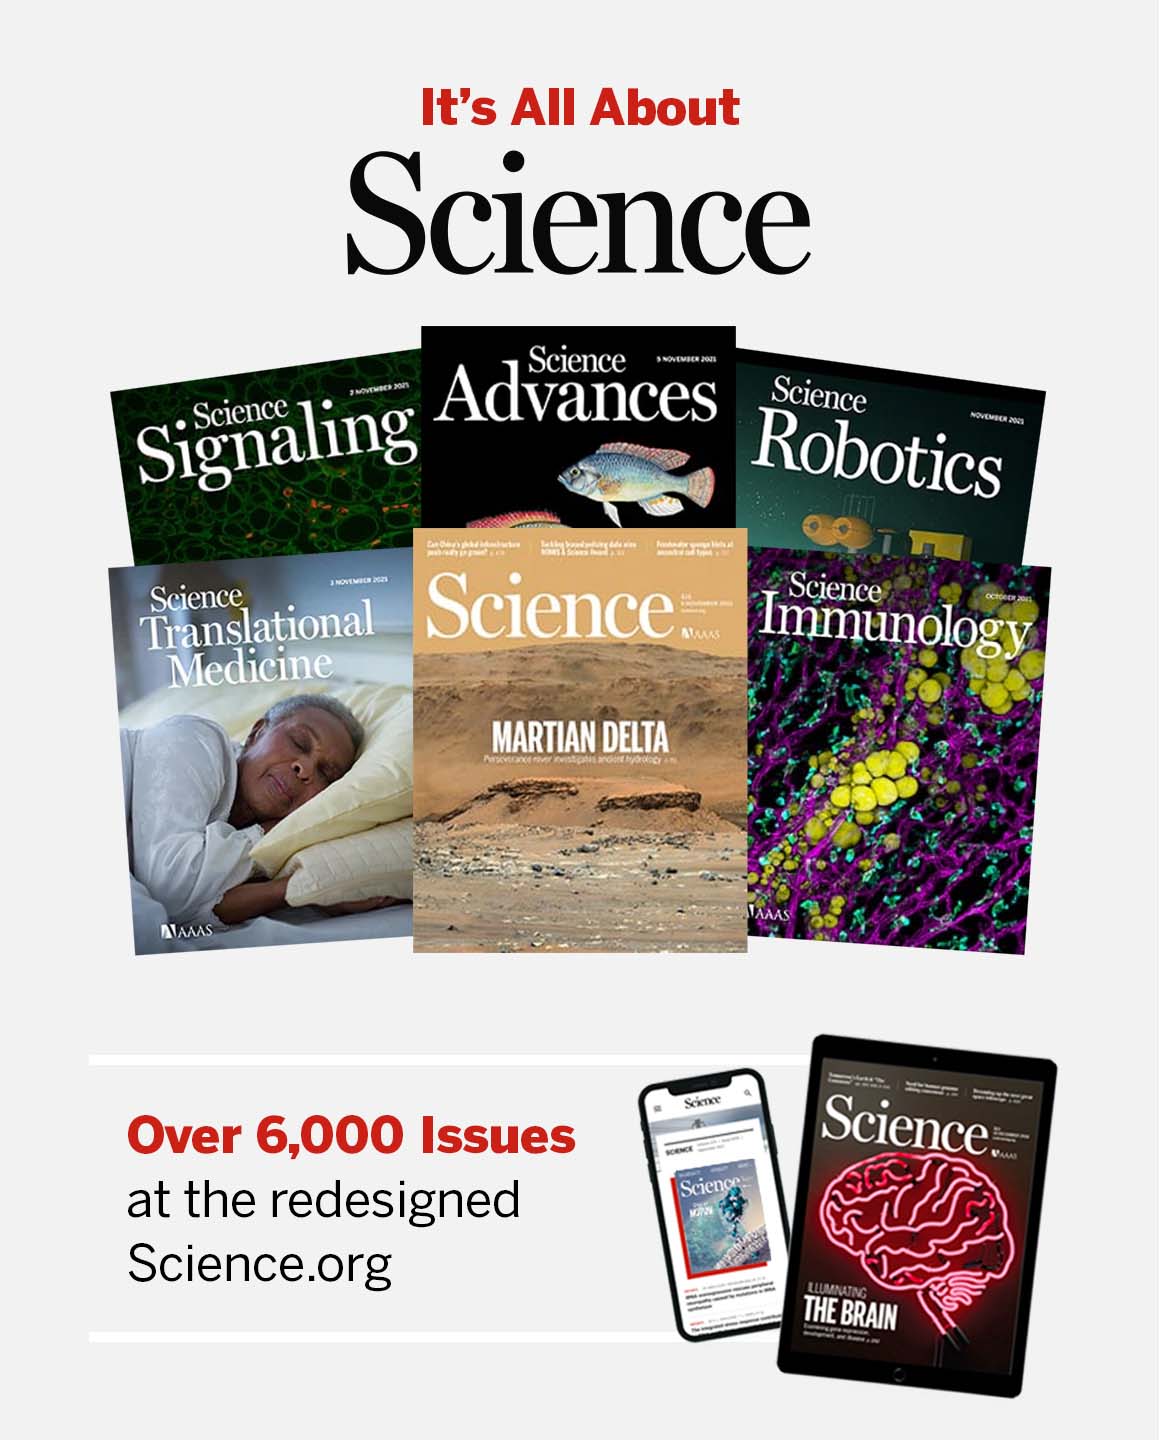 Science family of journals at Science.org